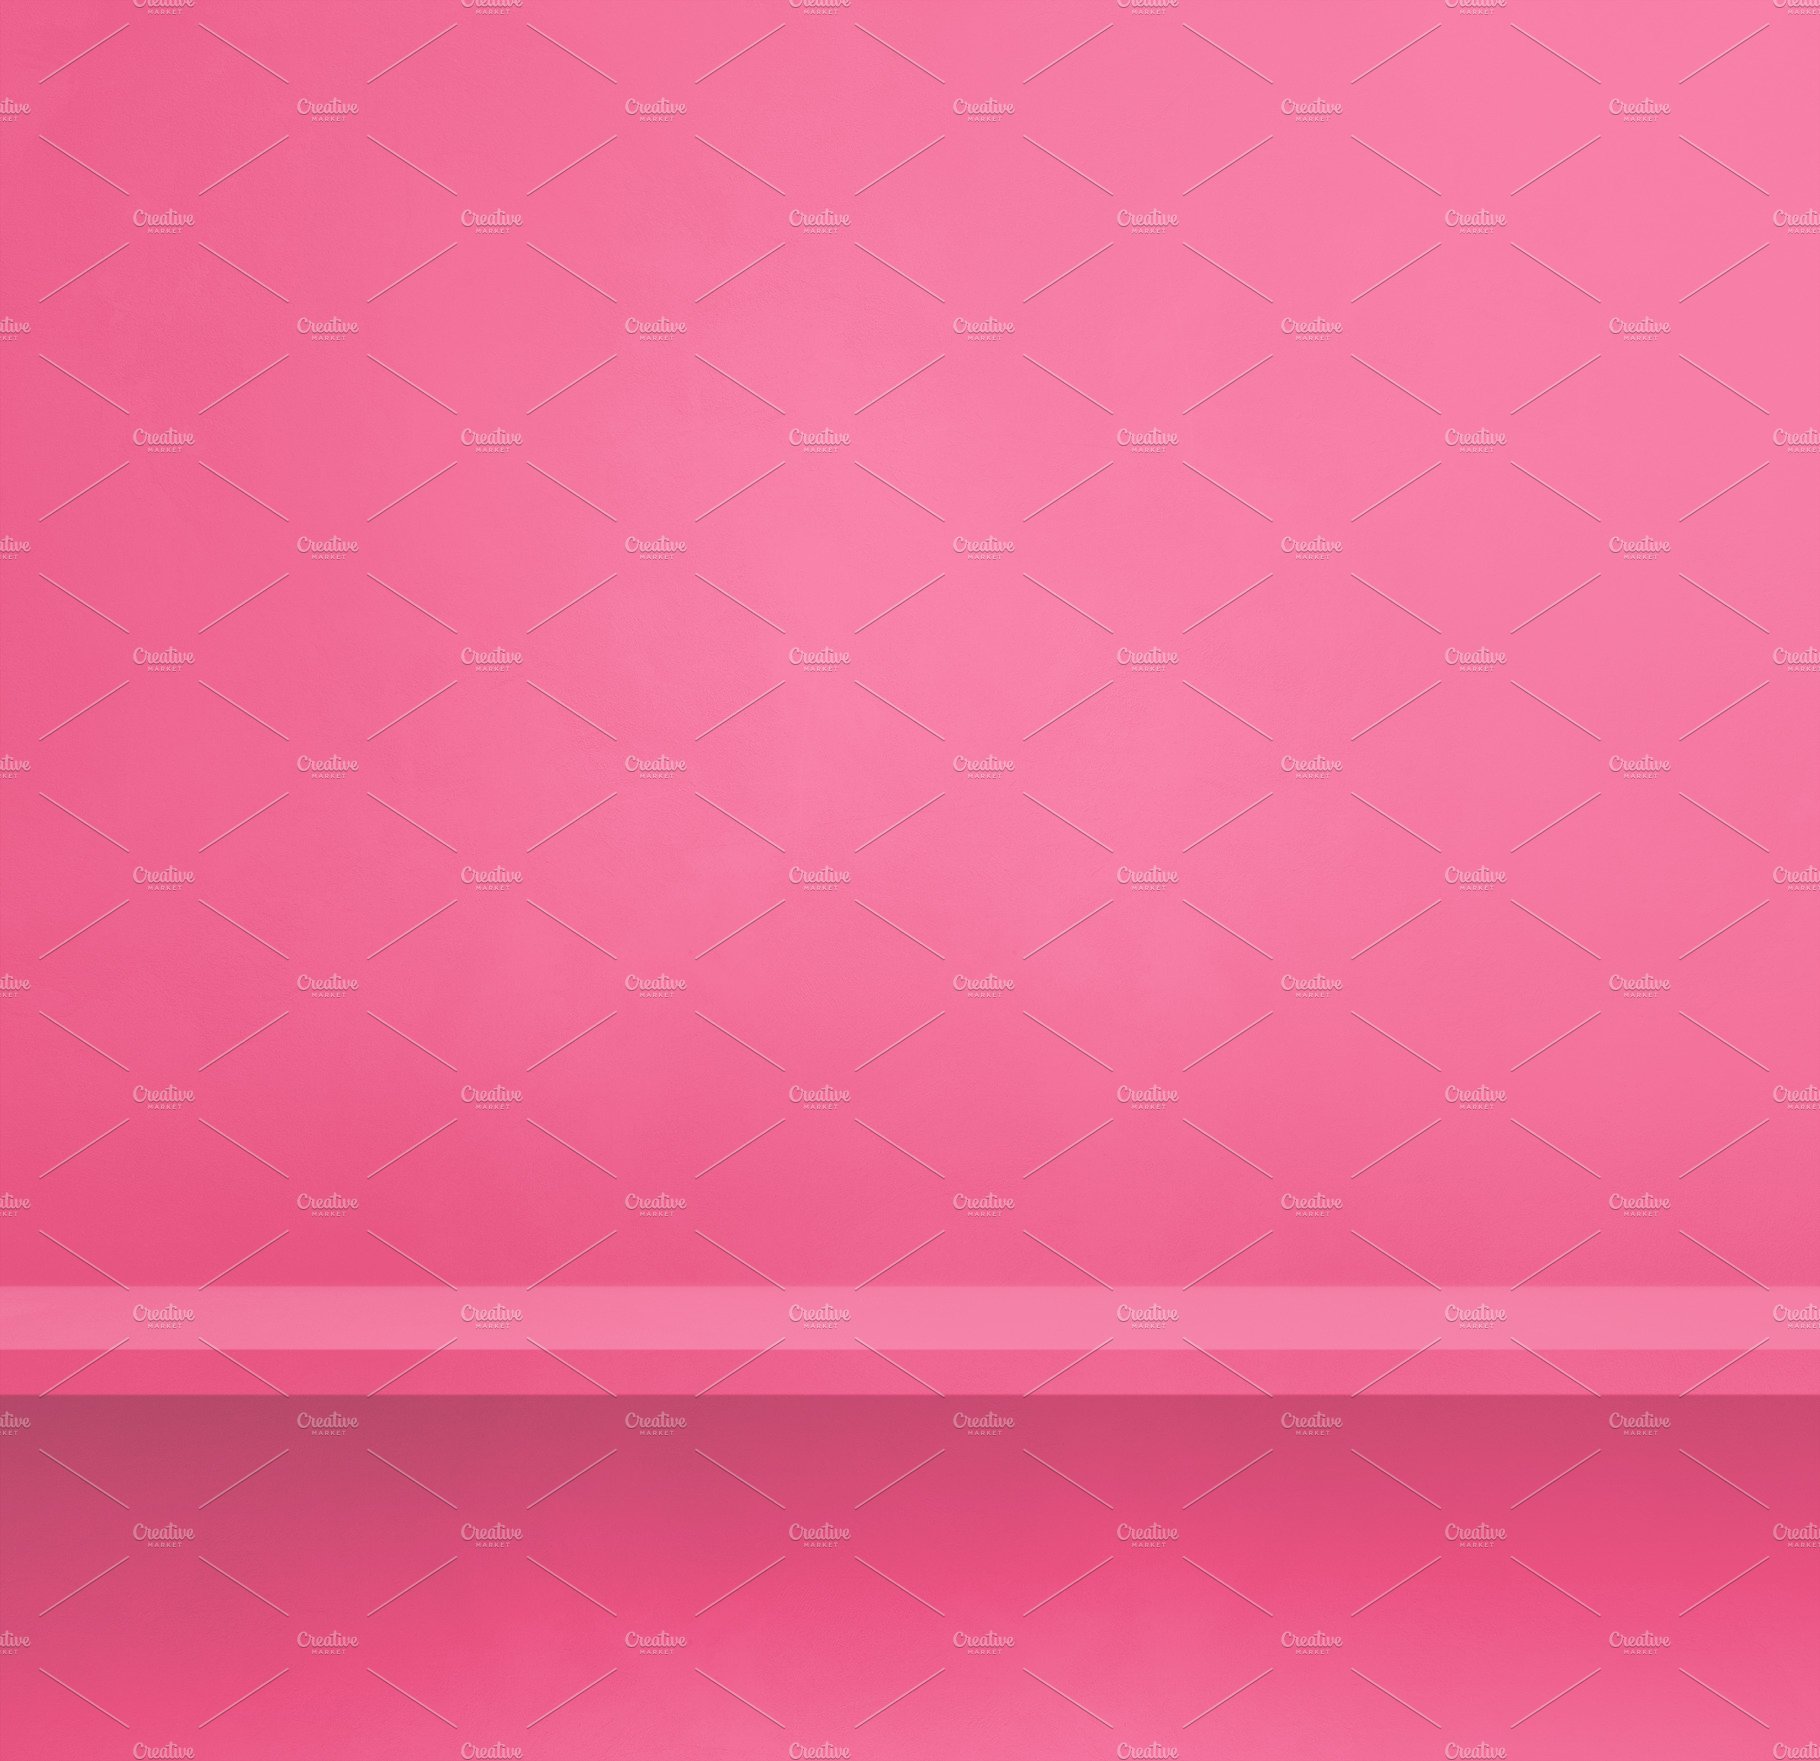 Empty shelf on a pink wall. Background template. Square banner cover image.